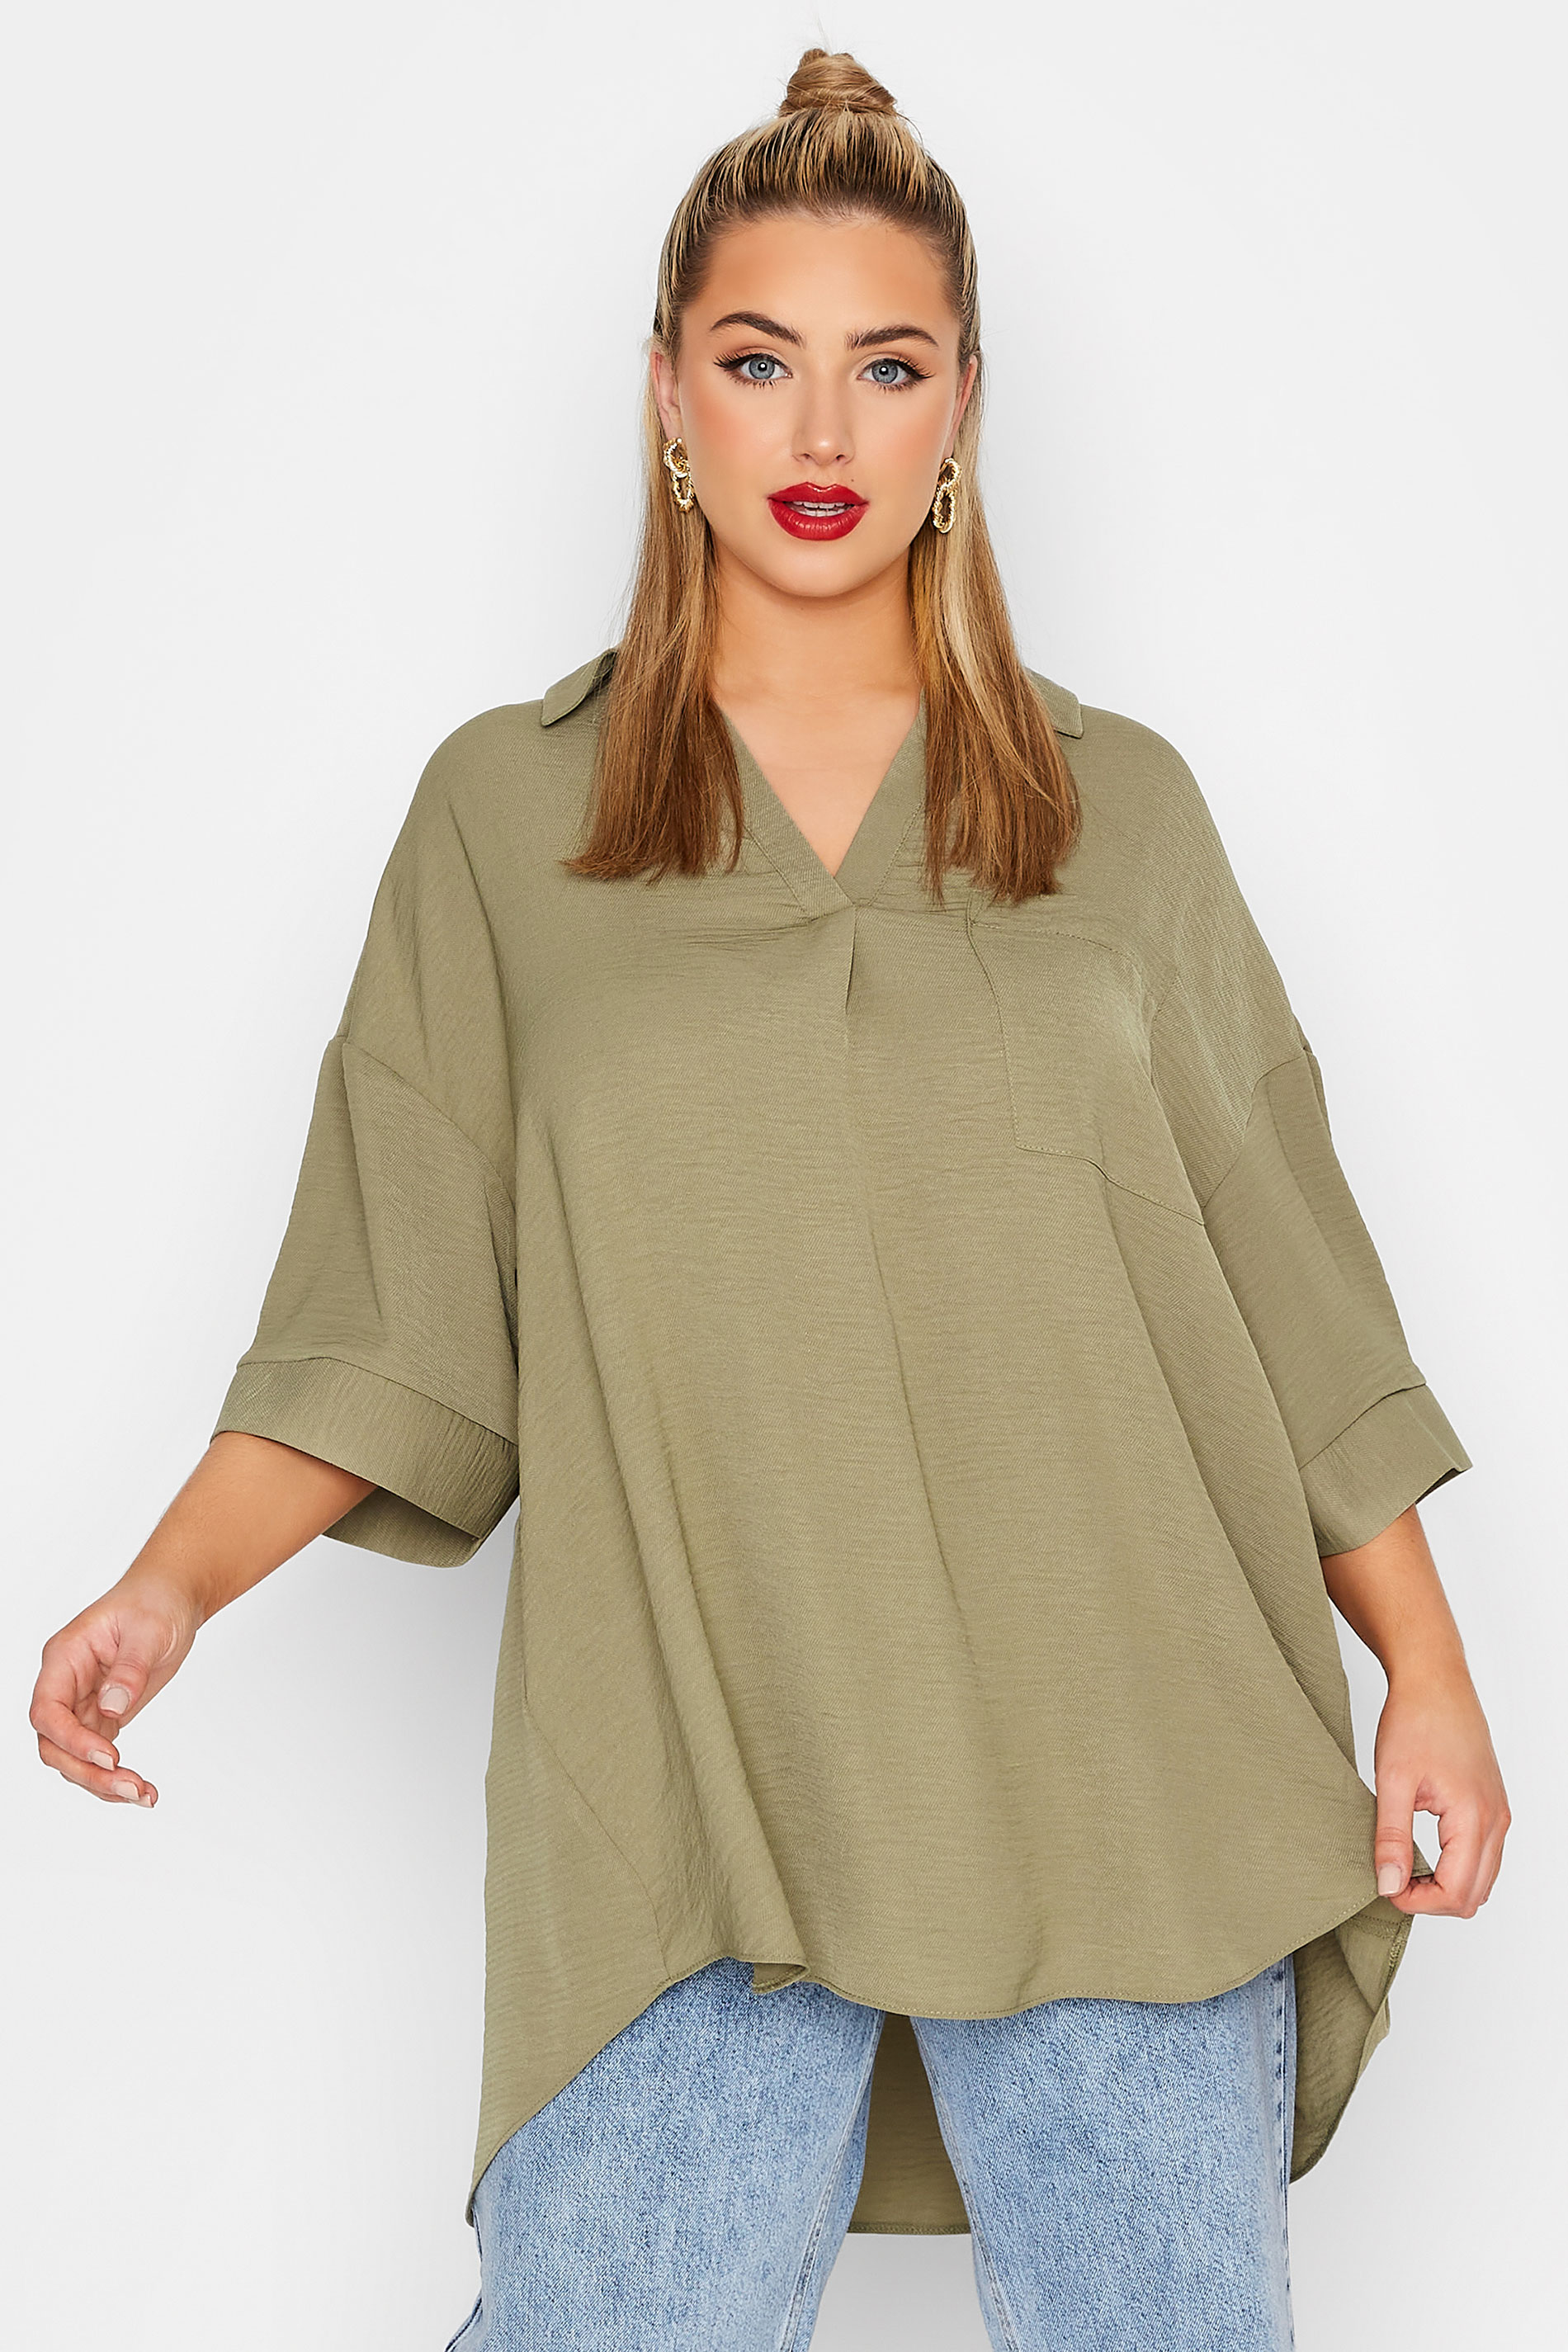 LIMITED COLLECTION Curve Olive Green Pleated Front Top 1